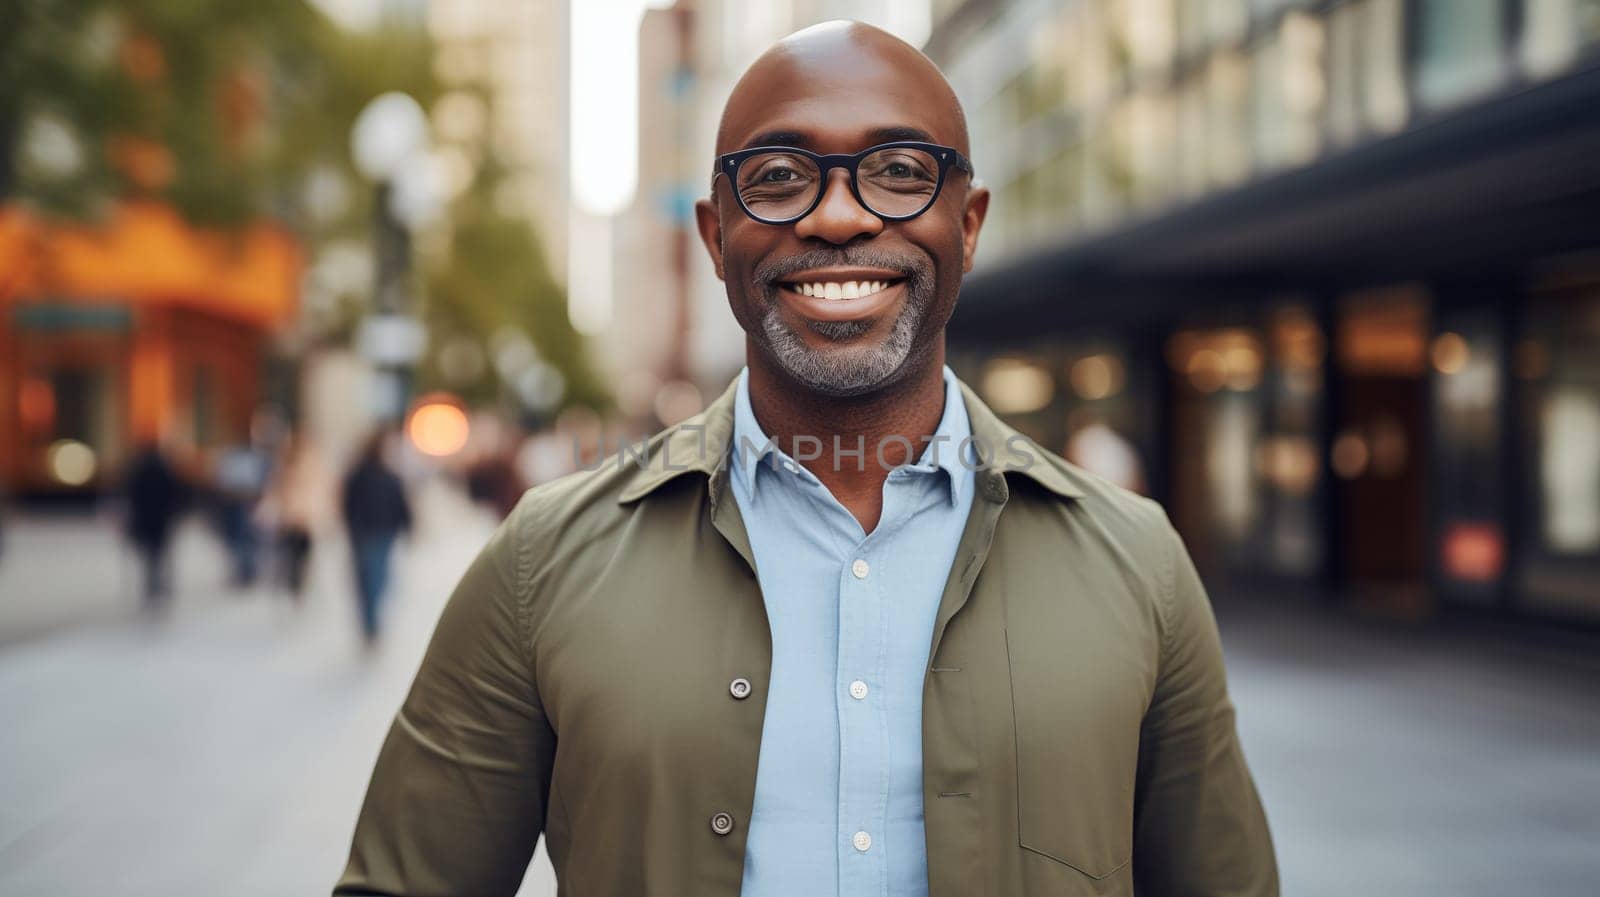 Confident happy smiling mature African businessman standing in the city, wearing casual clothes, glasses, looking at camera